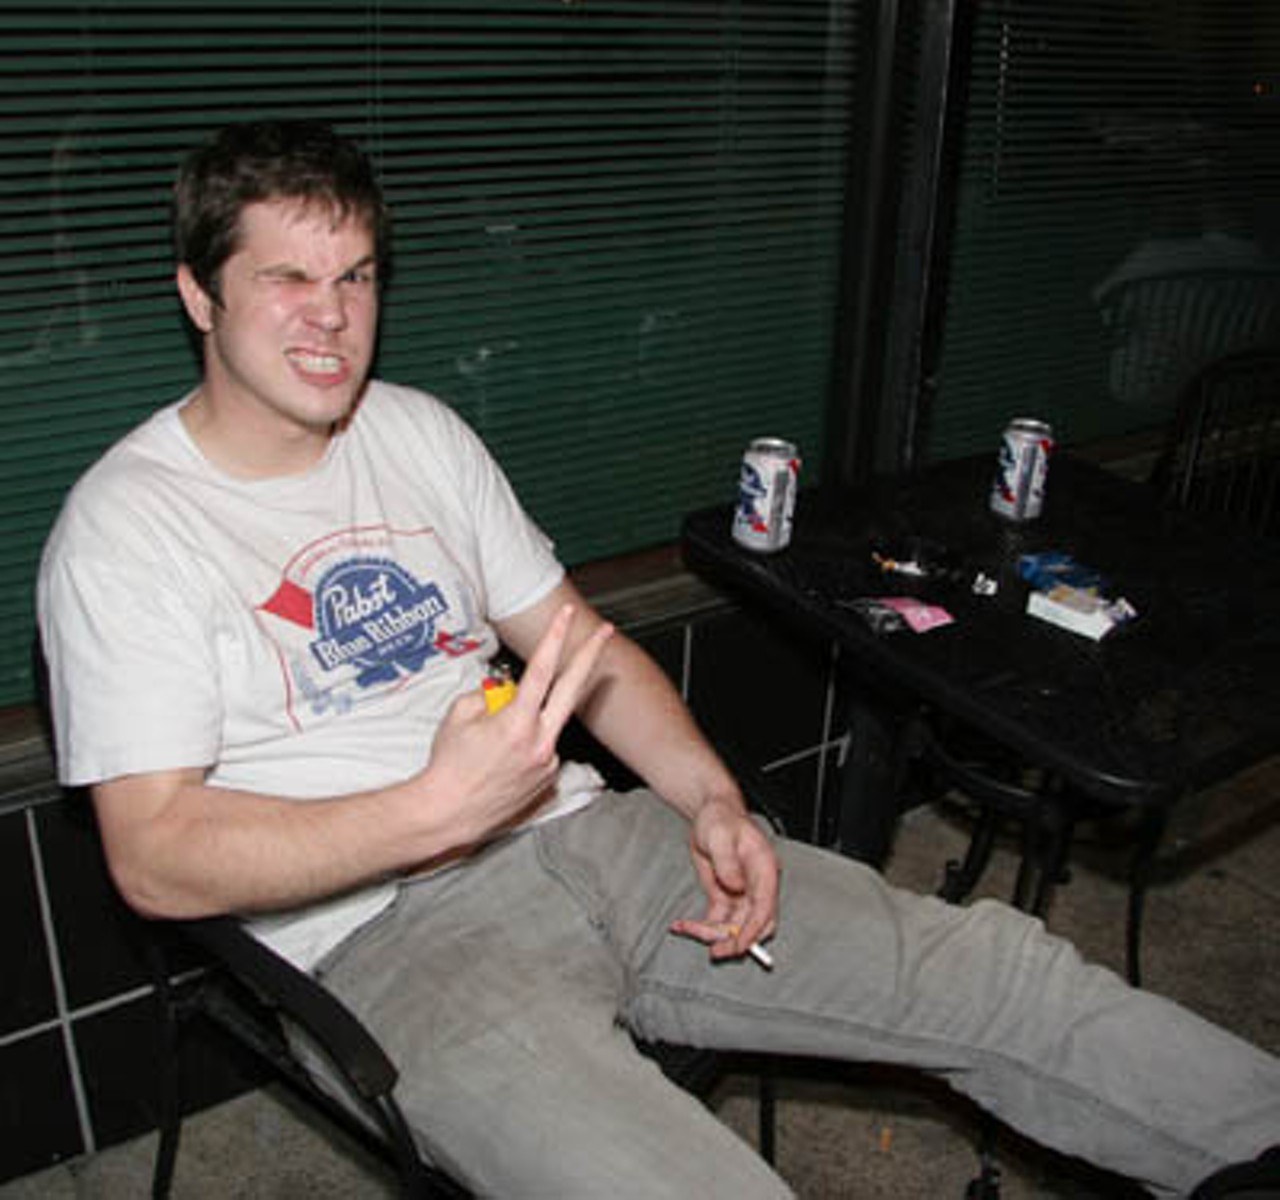 He loves PBR. Outside the Upstairs Lounge/Jade Room, 2 a.m..